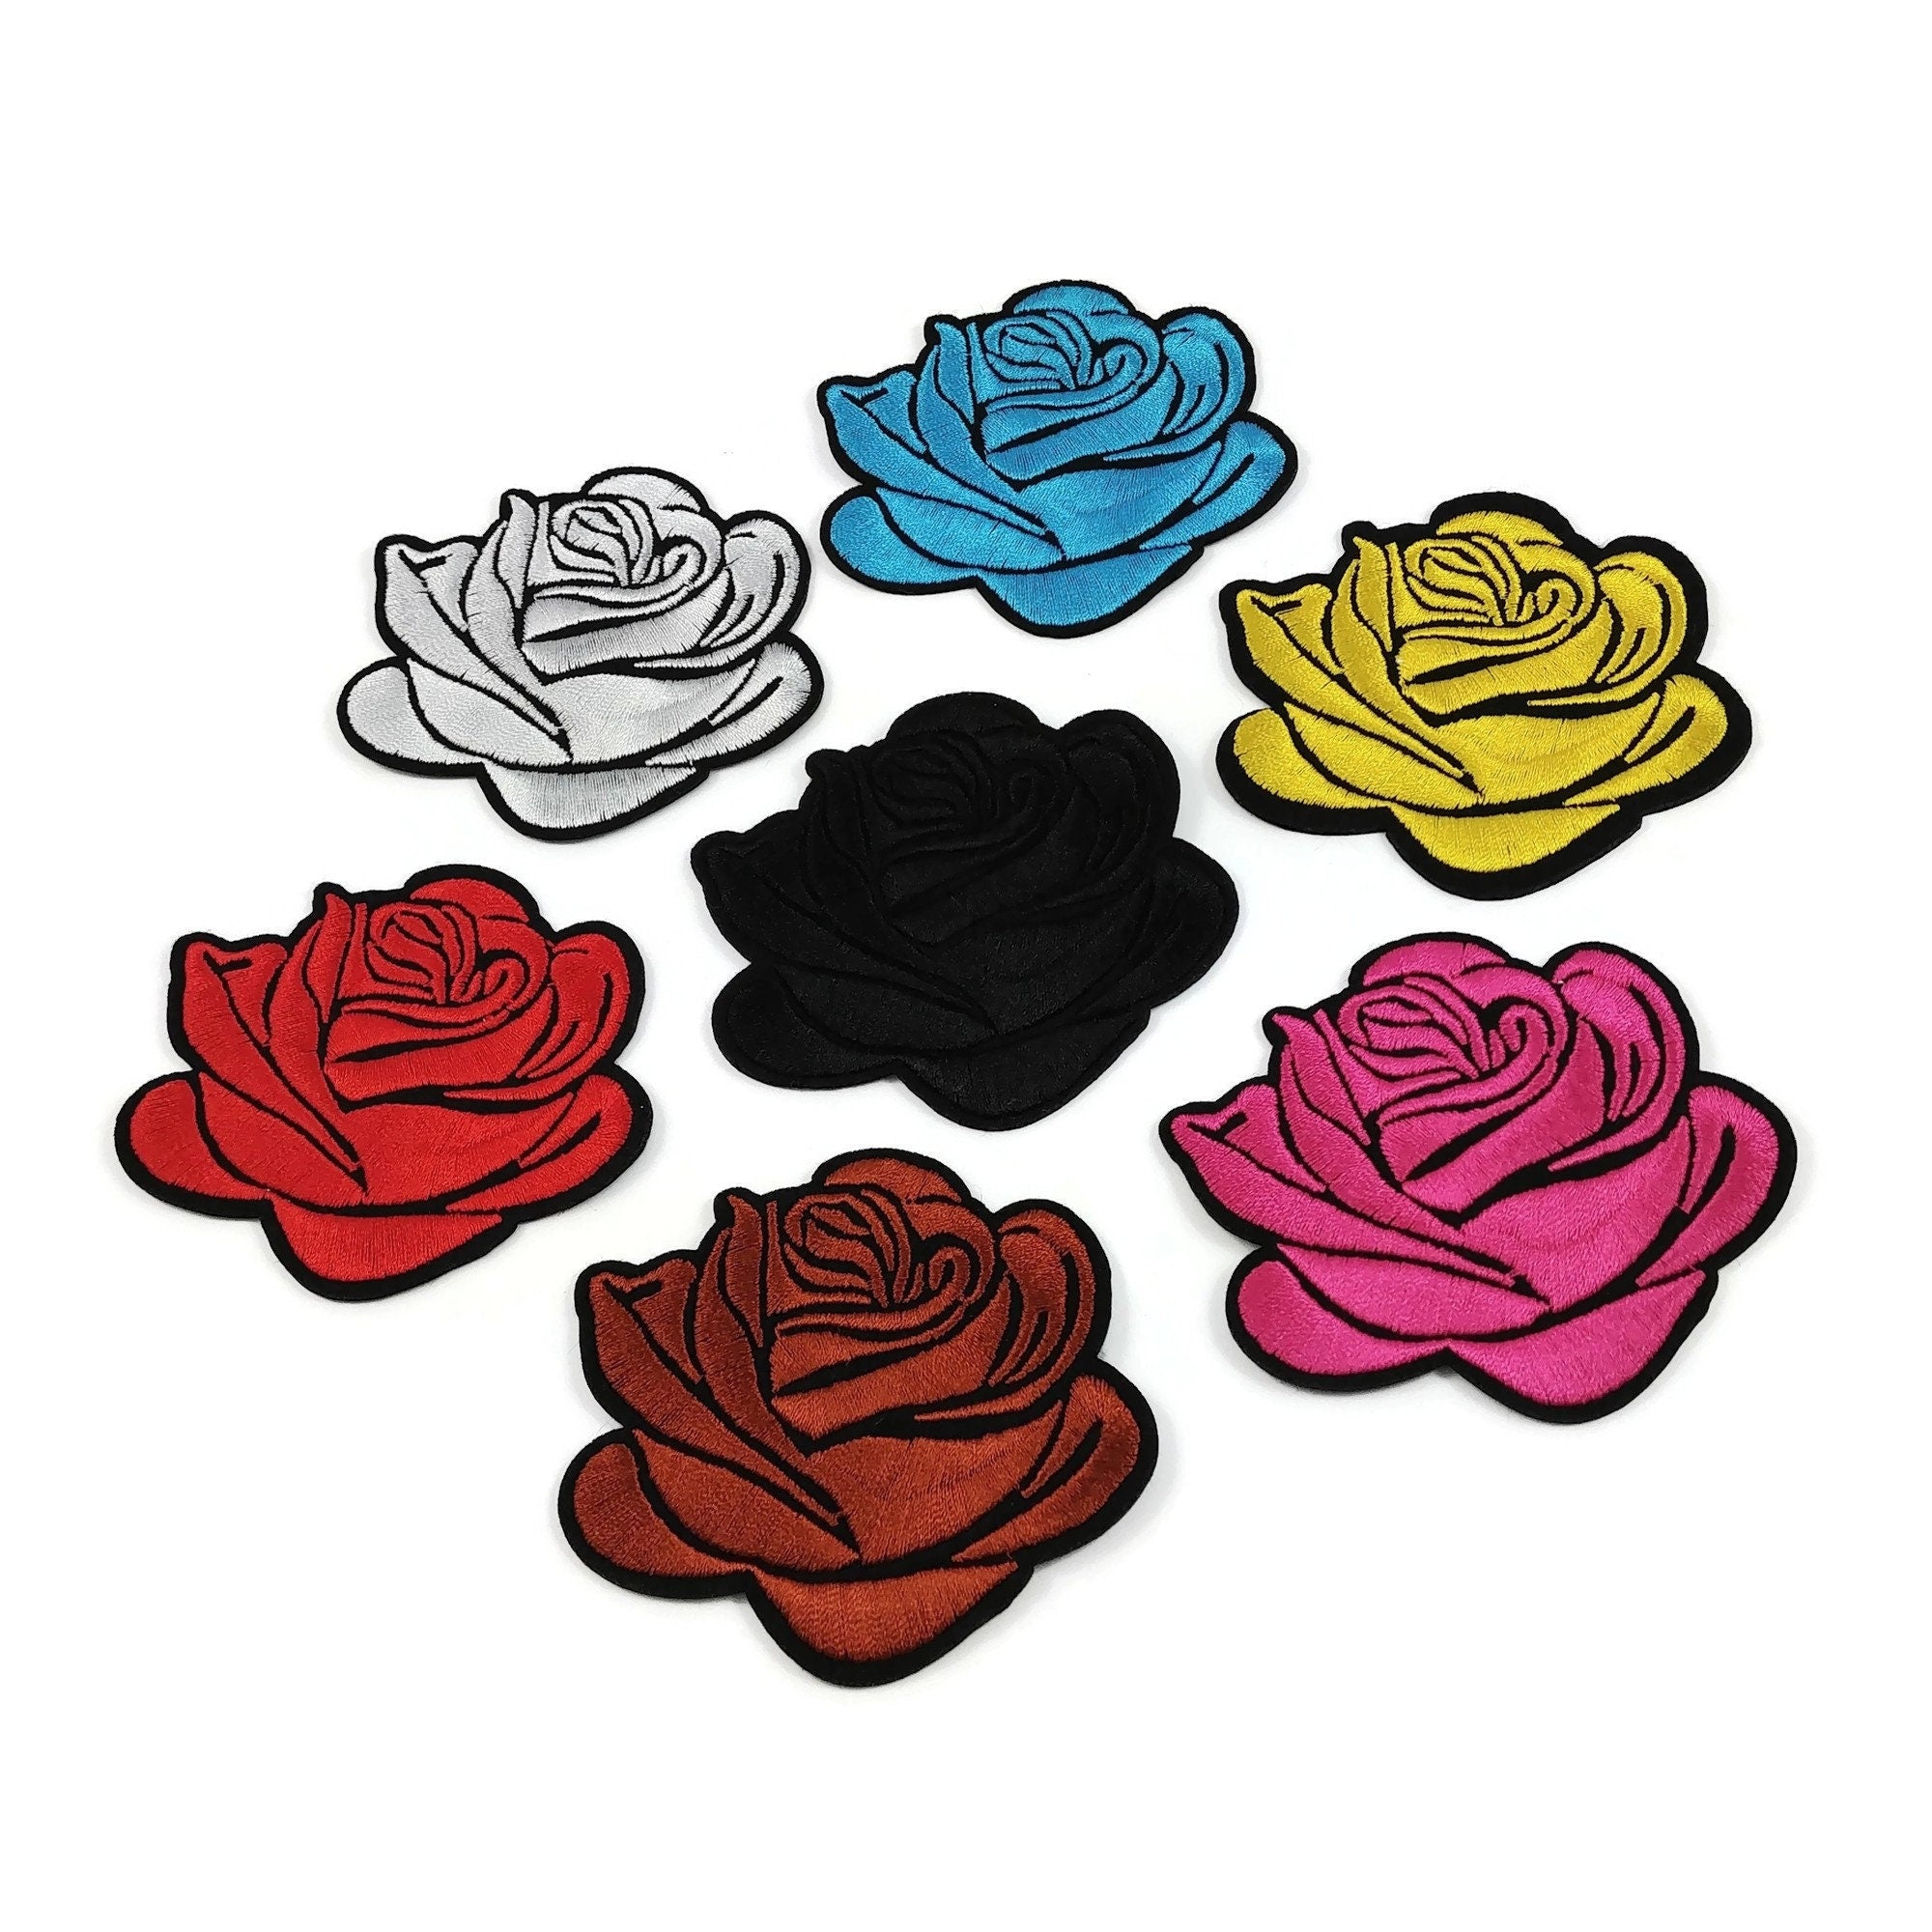 Large rose patch, Flower iron on patch, Embroidered patch for jackets